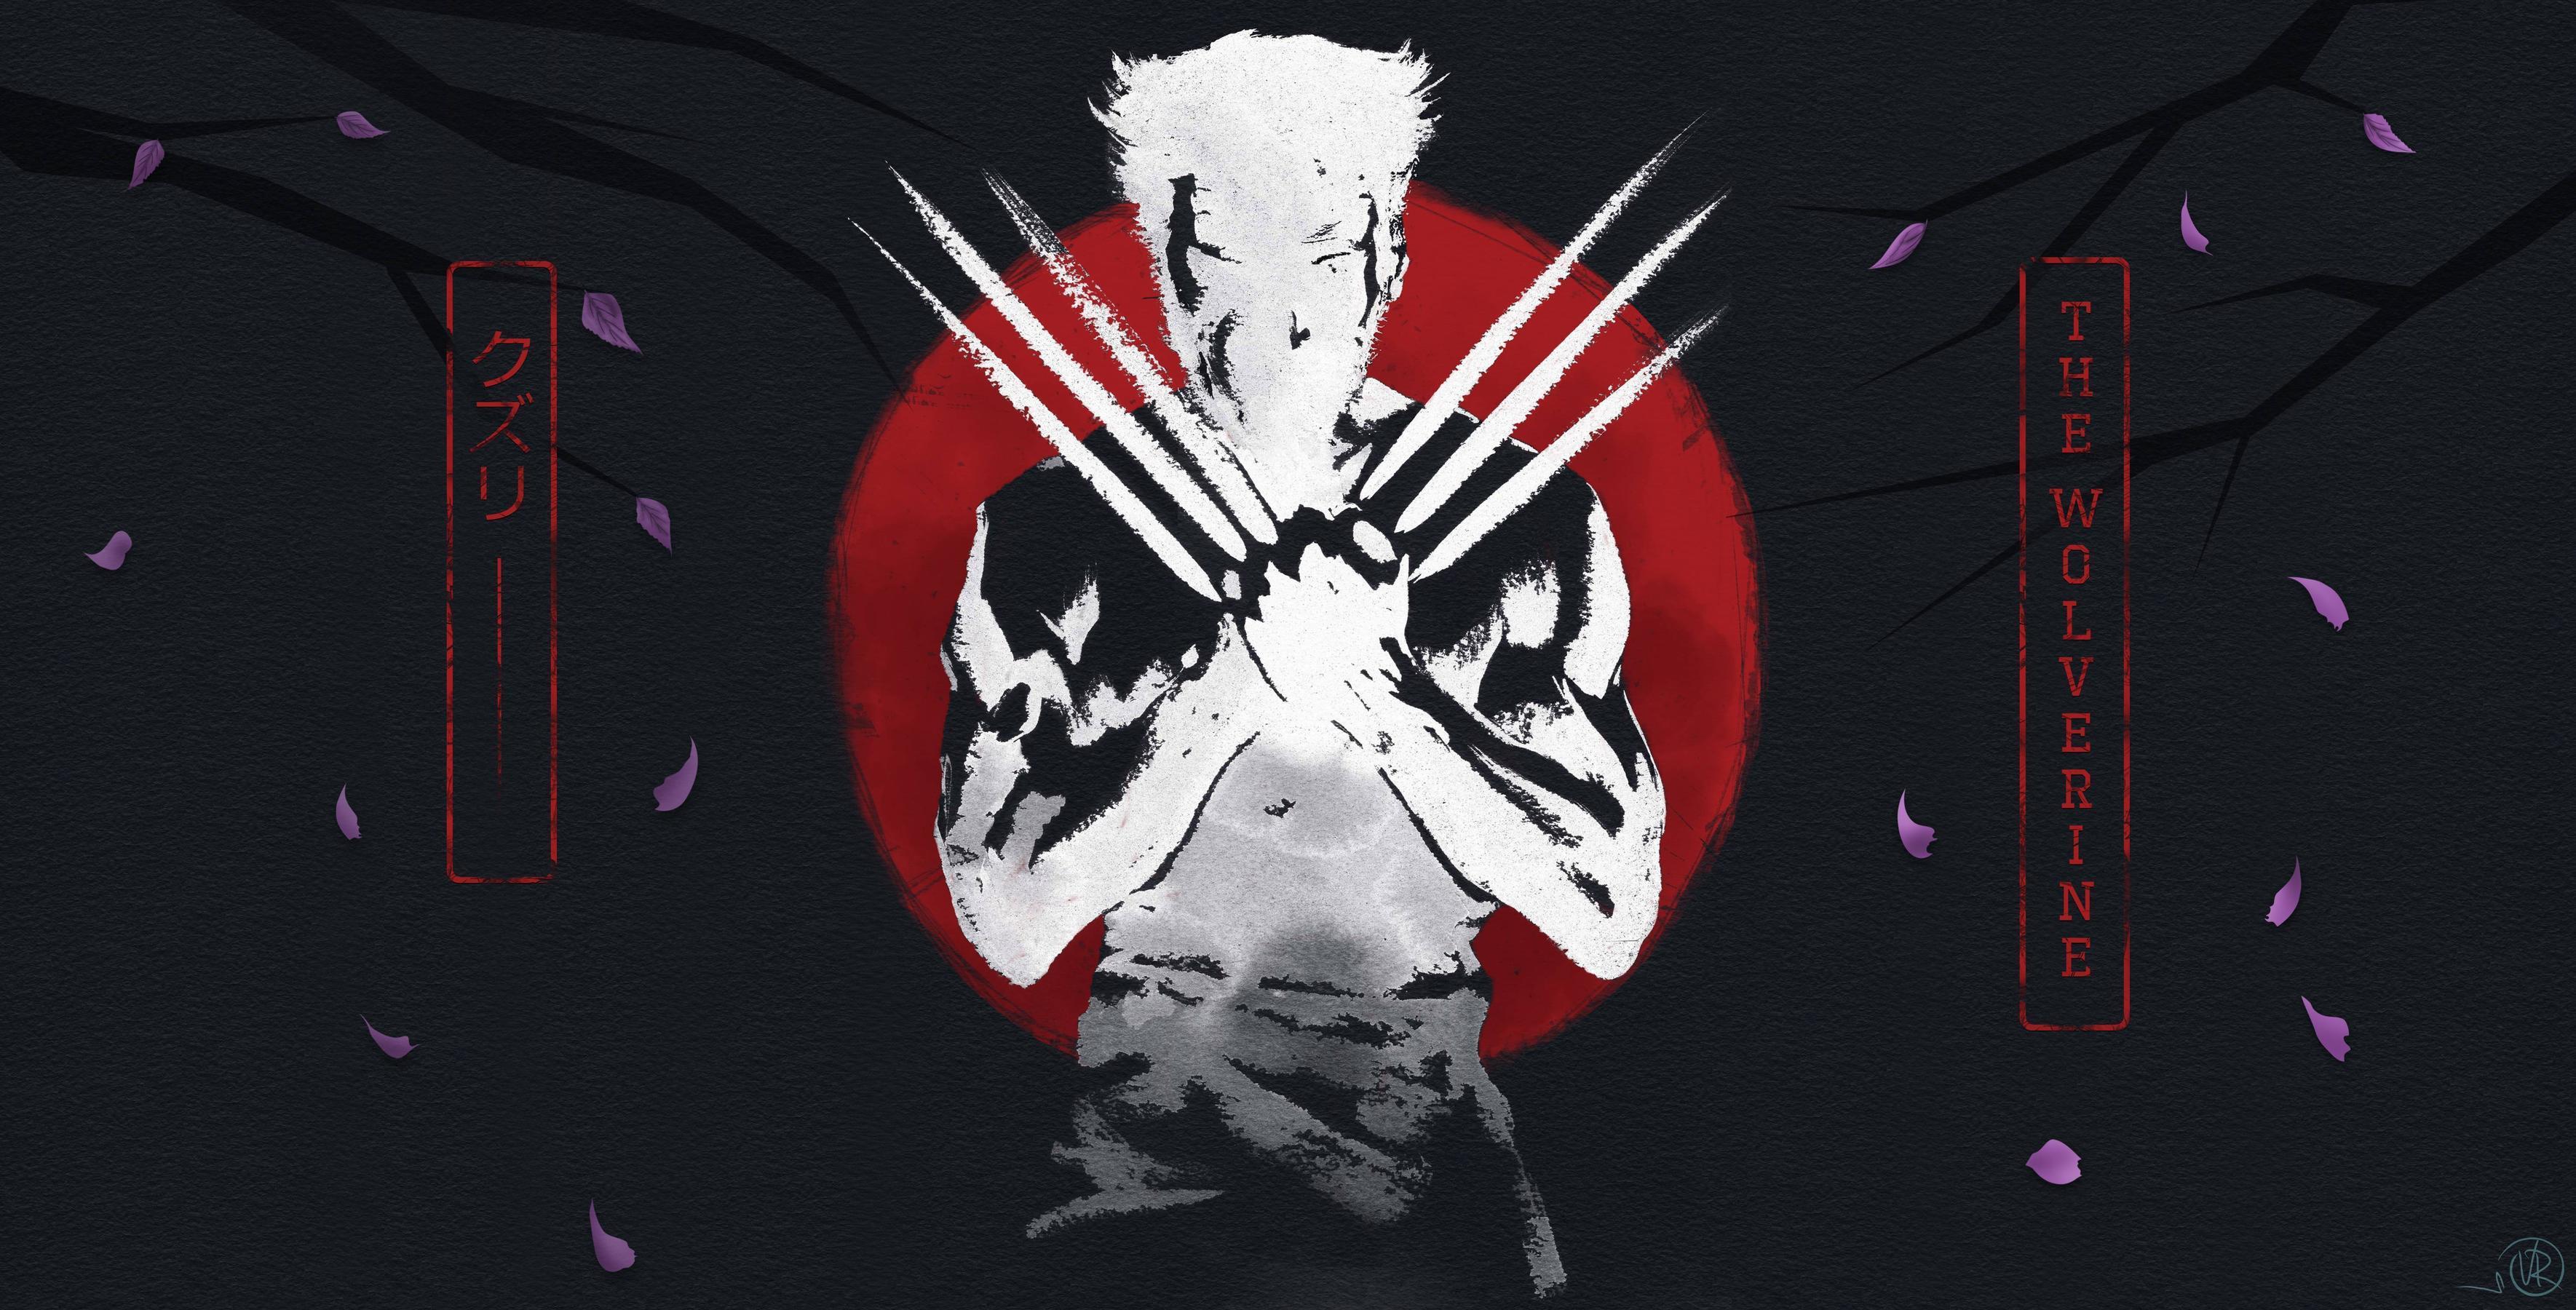 Wolverine 2 Wallpaper Picture Free Download. vergapipe